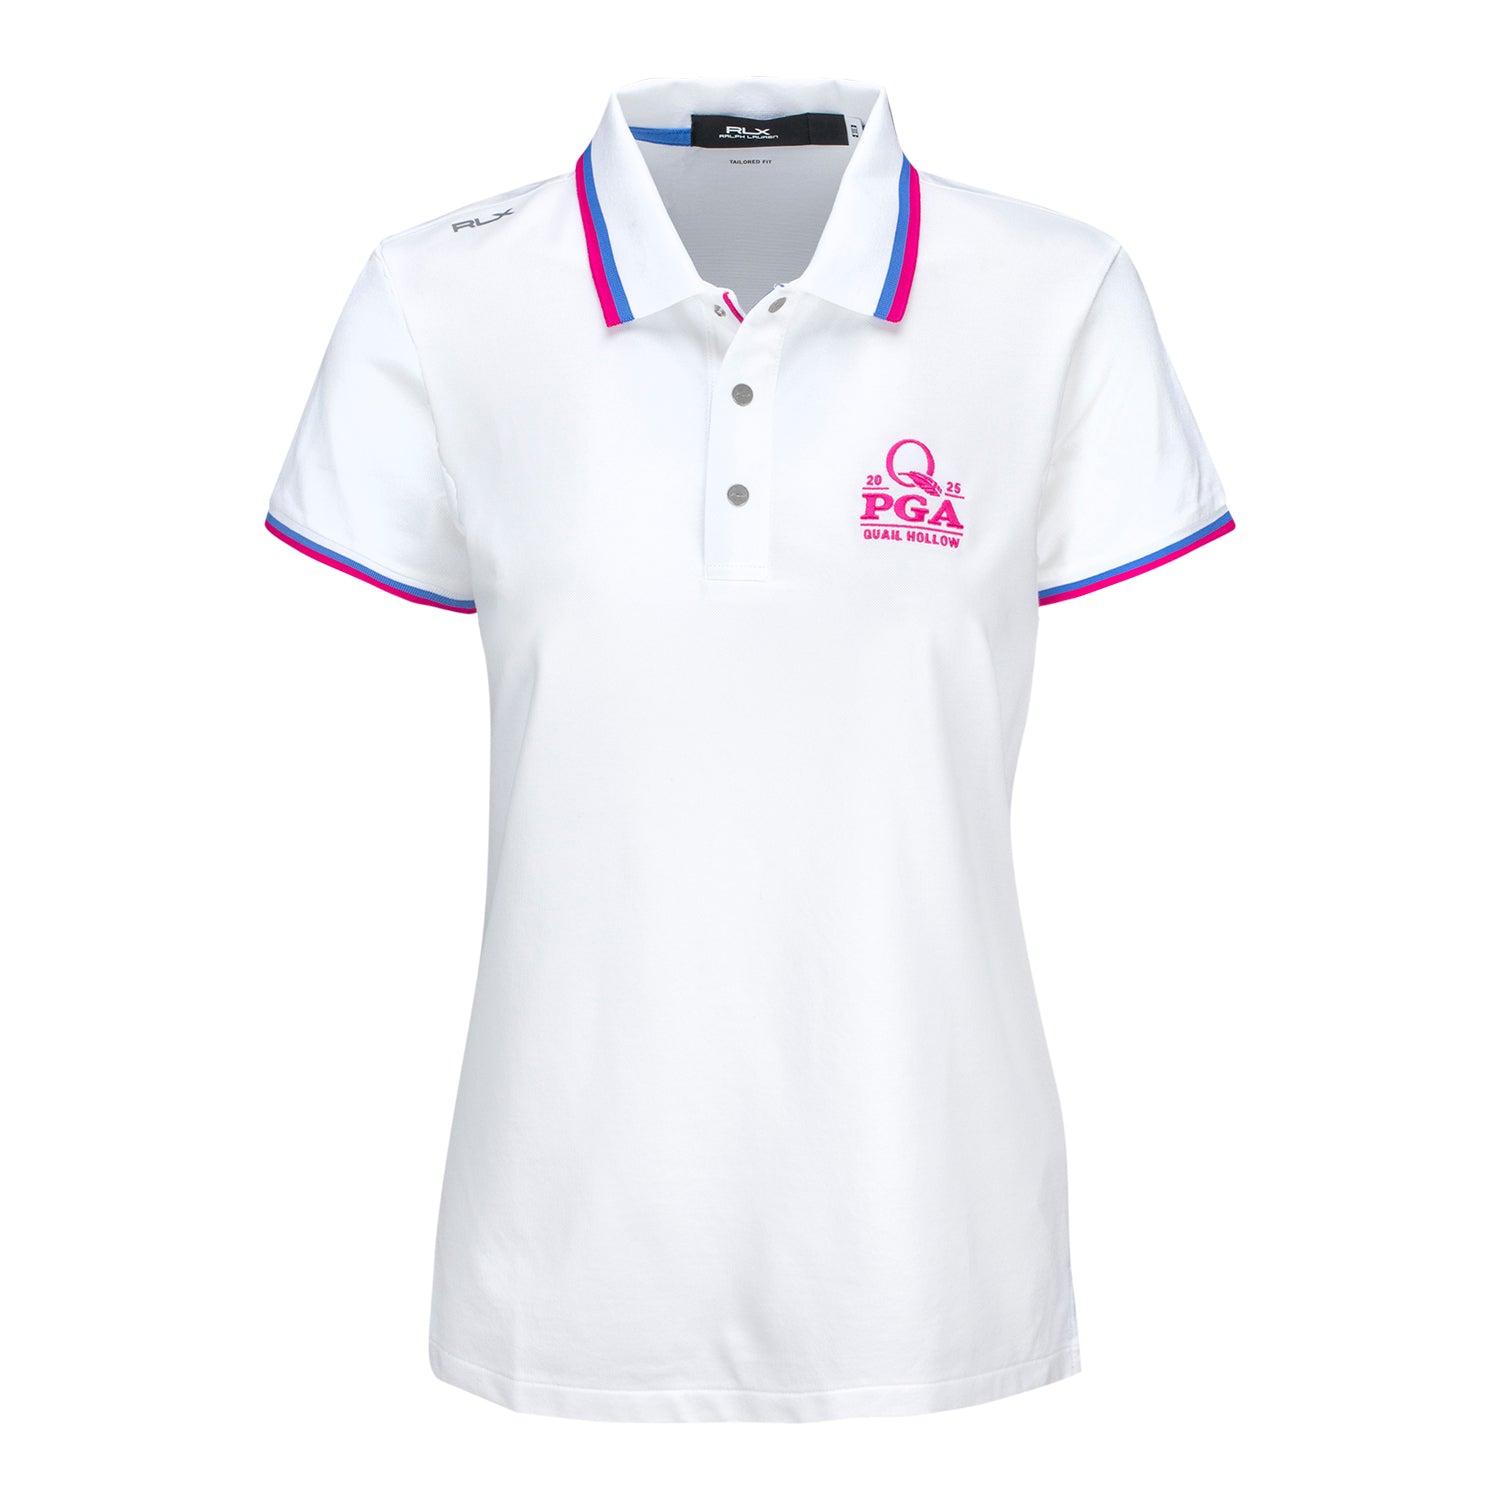 Ralph Lauren 2025 PGA Championship Women's Pique Polo in White with Pink and Blue - Front View